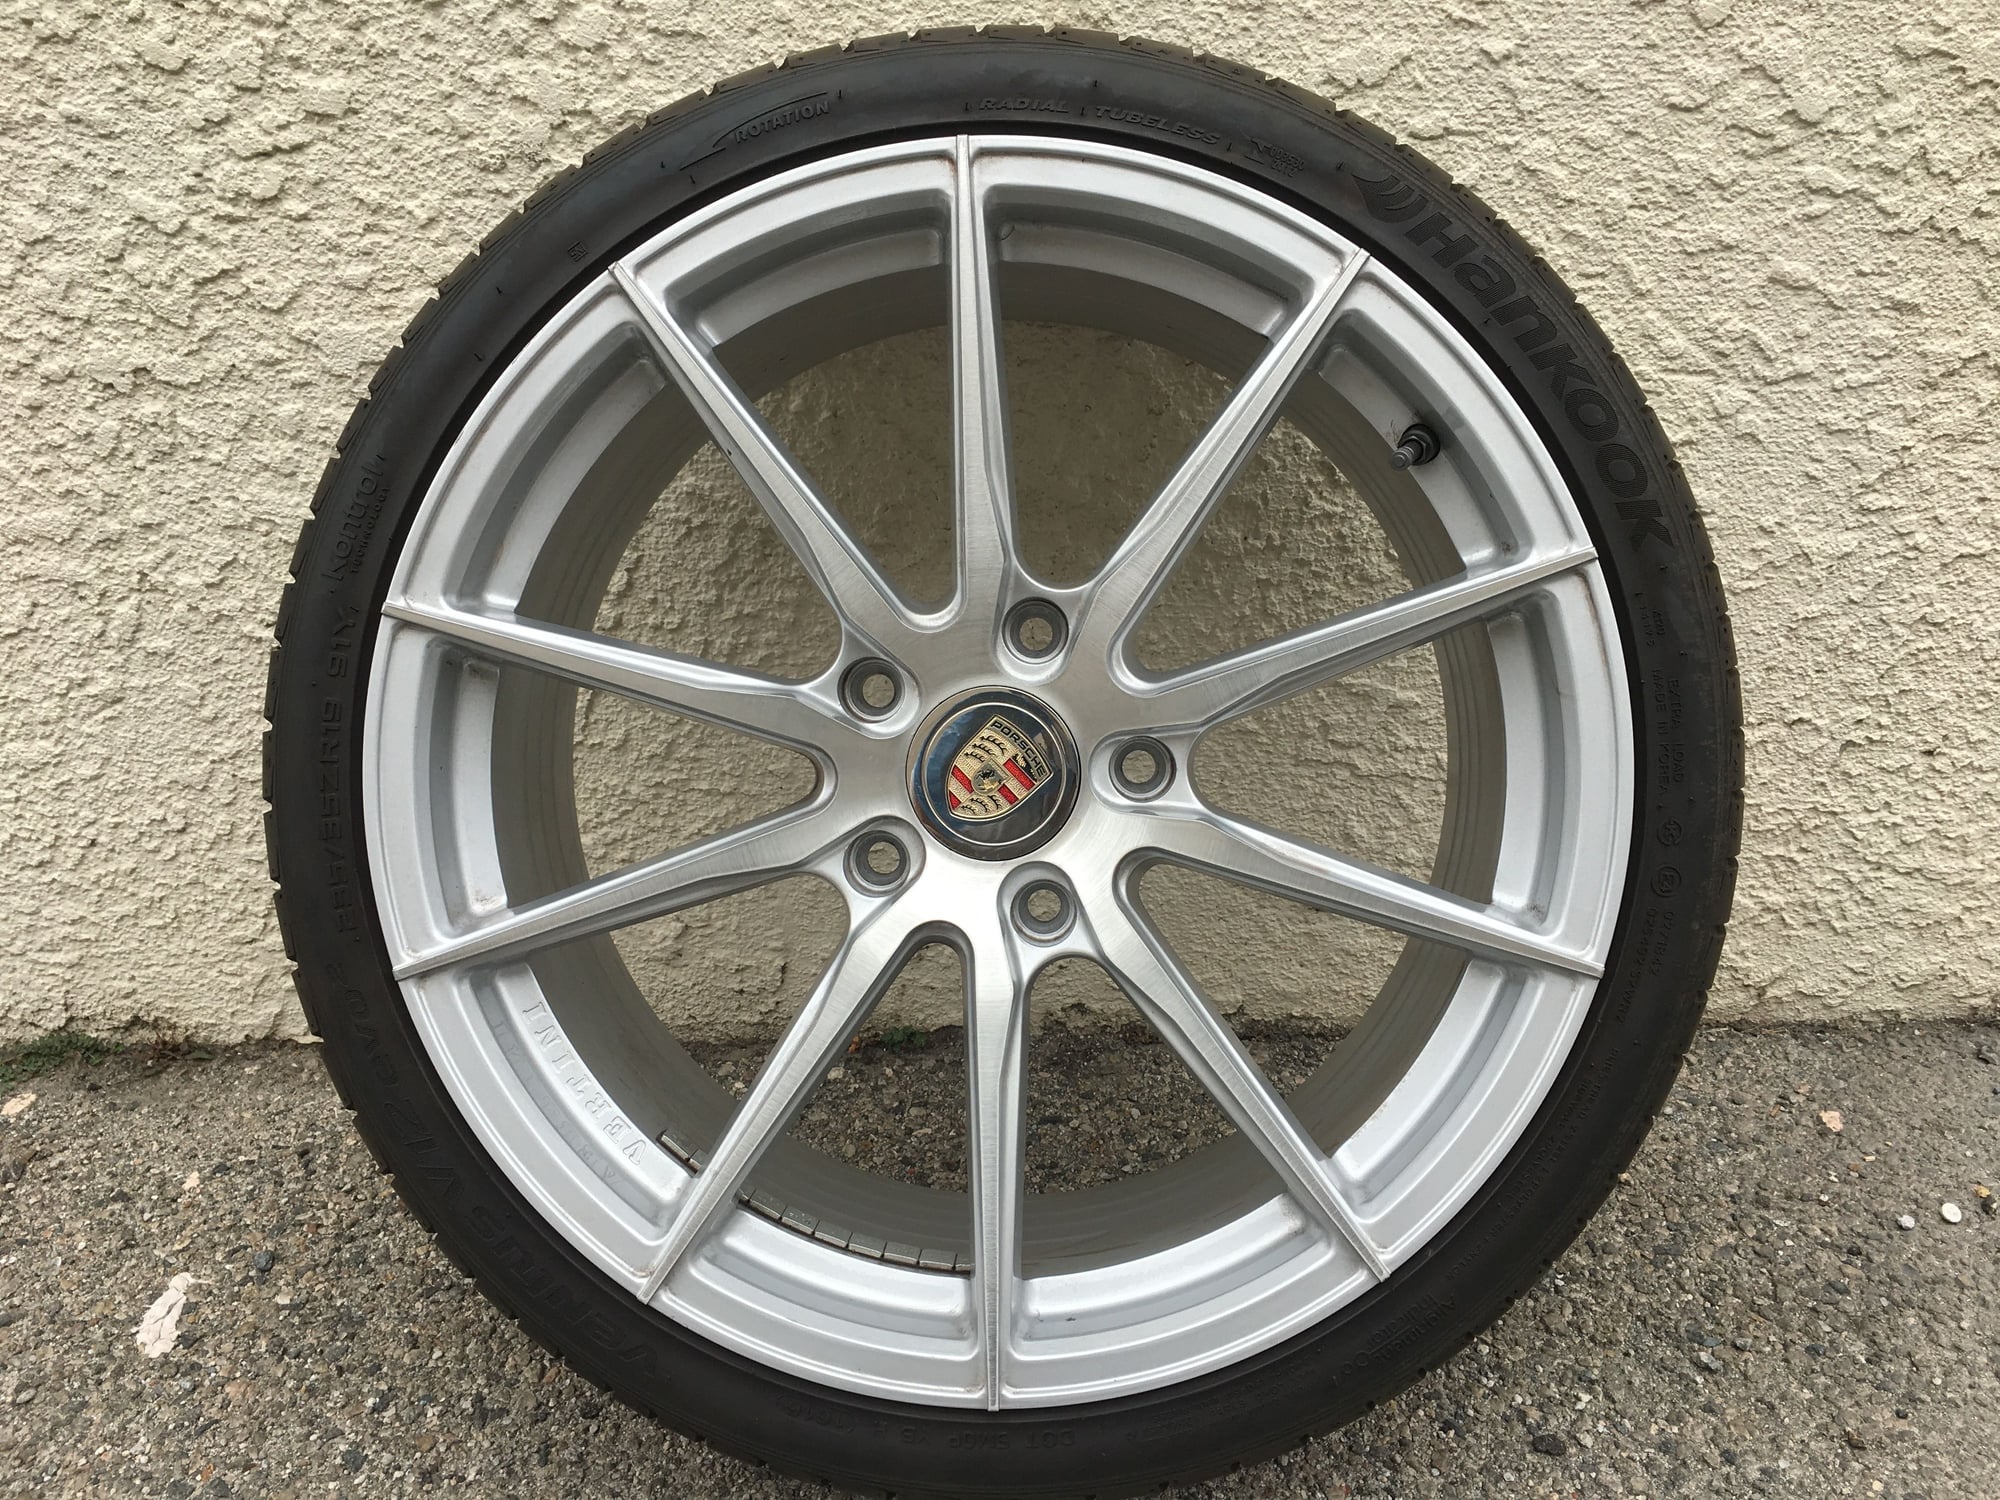 Wheels and Tires/Axles - Porsche 997/.2 Carrera S 19inch Wheels/NEW Tires/NEW TPMS/Balanced - Used - Los Angeles, CA 90034, United States